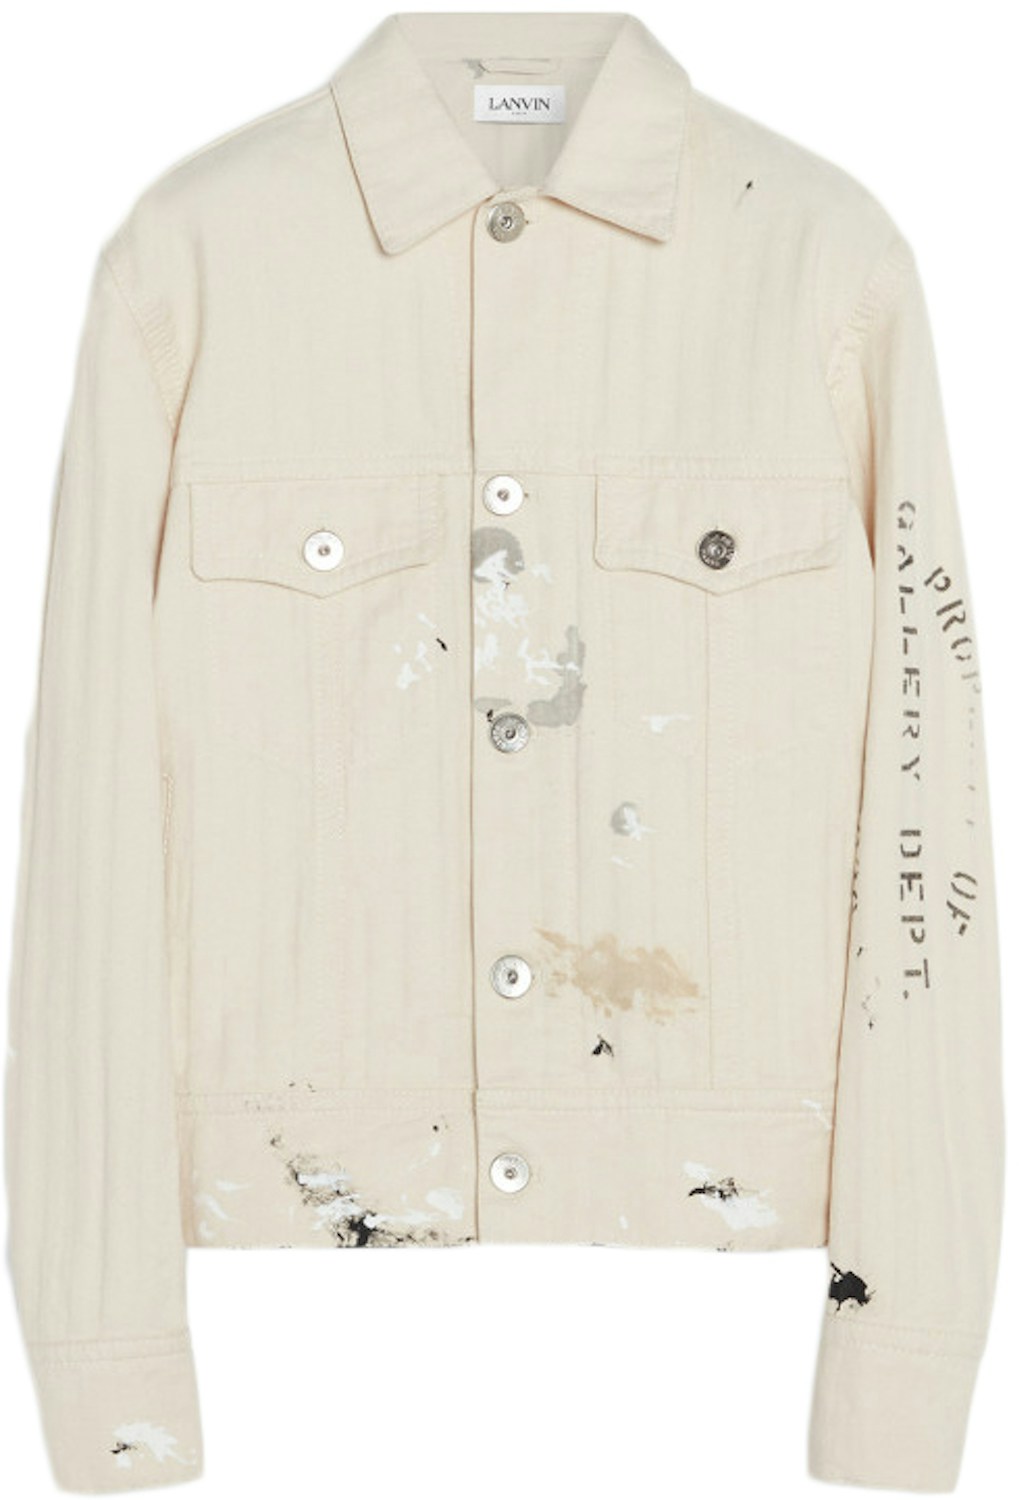 Lanvin x Gallery Department Denim Jacket With Paint Marks White - SS21